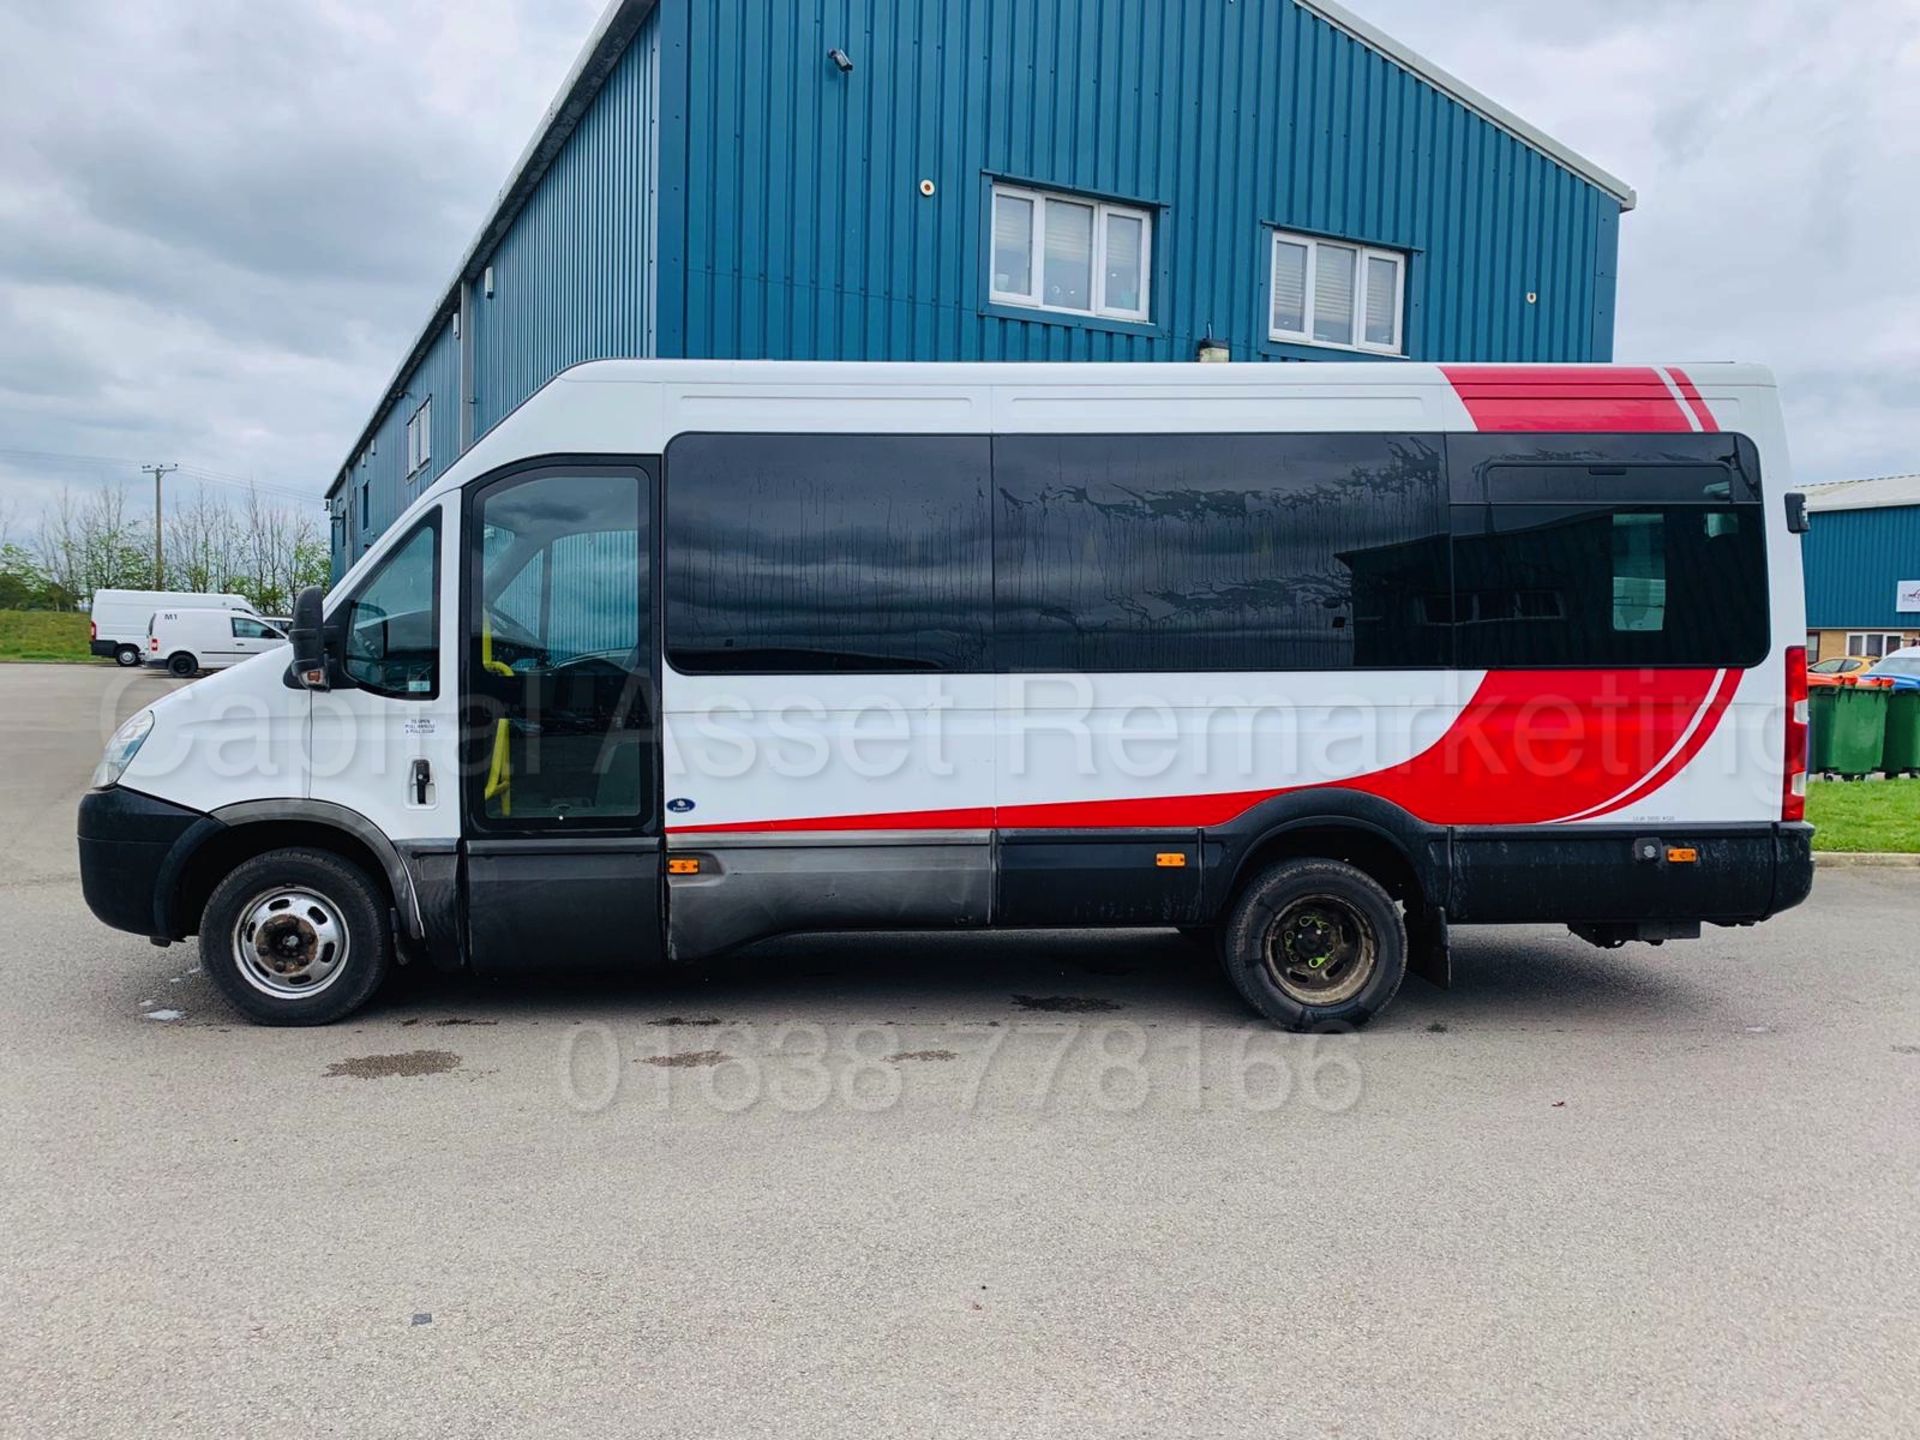 (ON SALE) IVECO DAILY *LWB - 16 SEATER MINI-BUS / COACH* (2010) '3.0 DIESEL - 146 BHP' *ELEC RAMP* - Image 4 of 32